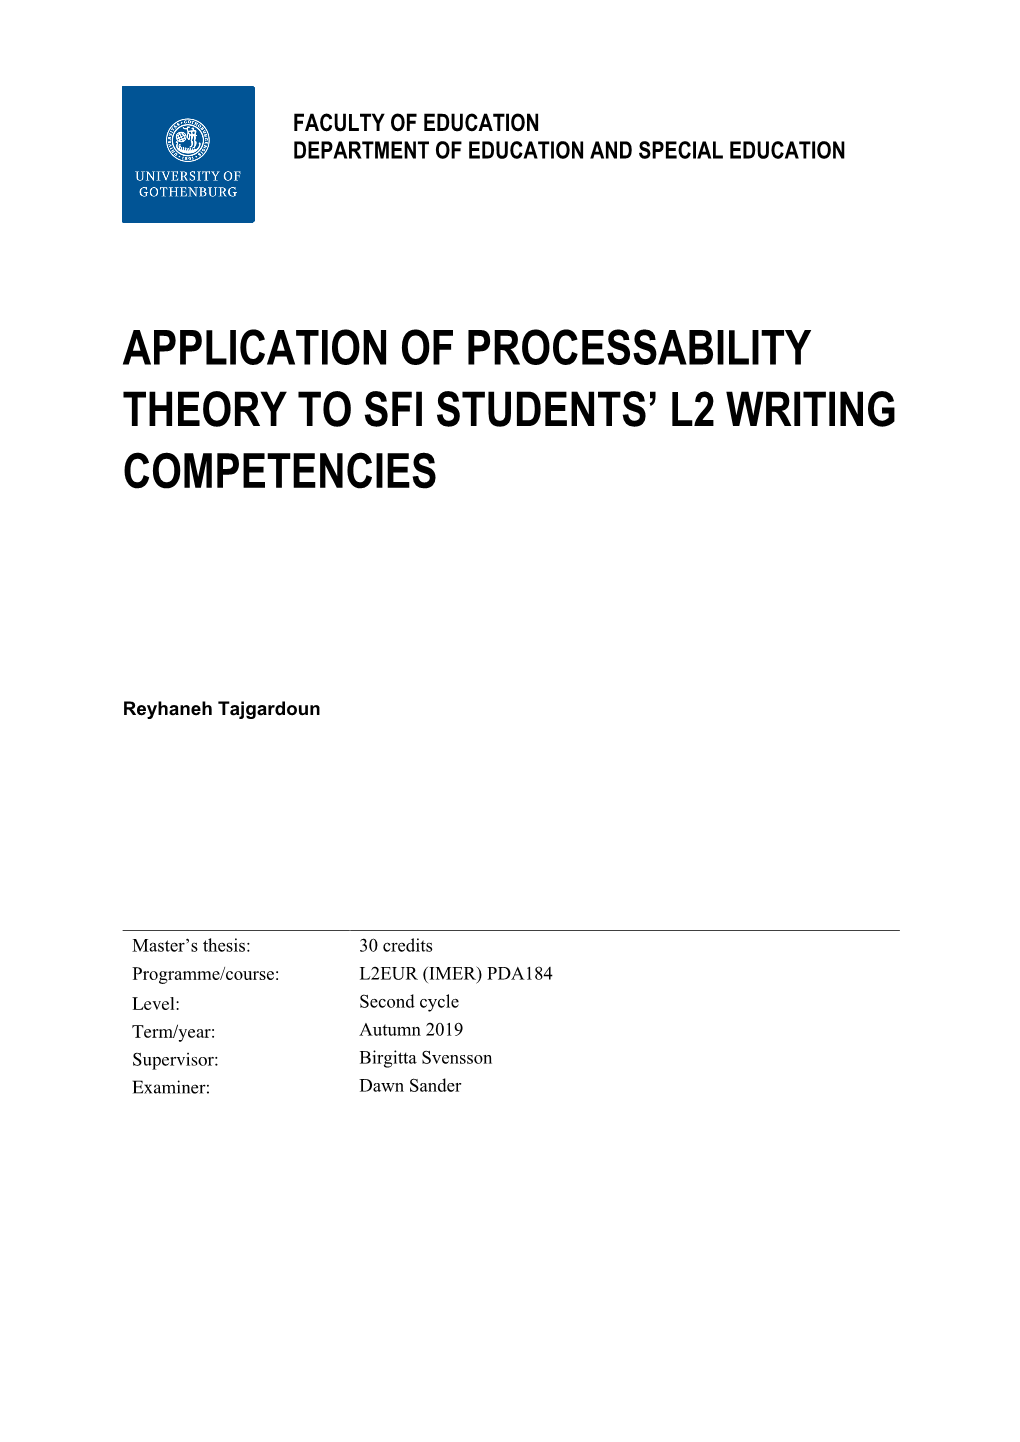 Application of Processability Theory to Sfi Students’ L2 Writing Competencies